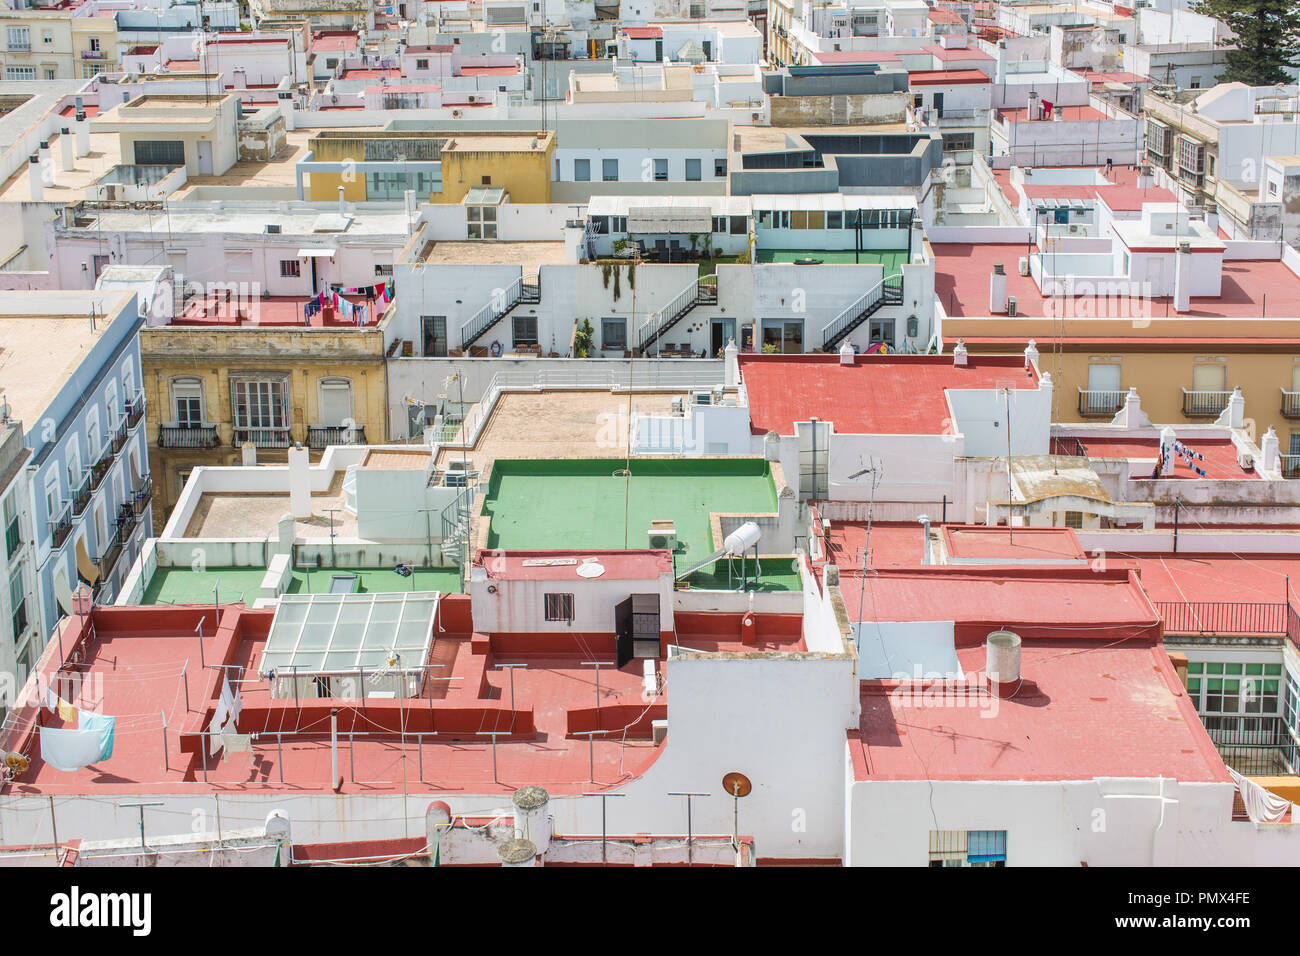 View looking down on rooftops from the Tavira Tower (Camera Obscura) in the city of Cadiz in Spain. Flat roof and colourful buildings. Stock Photo